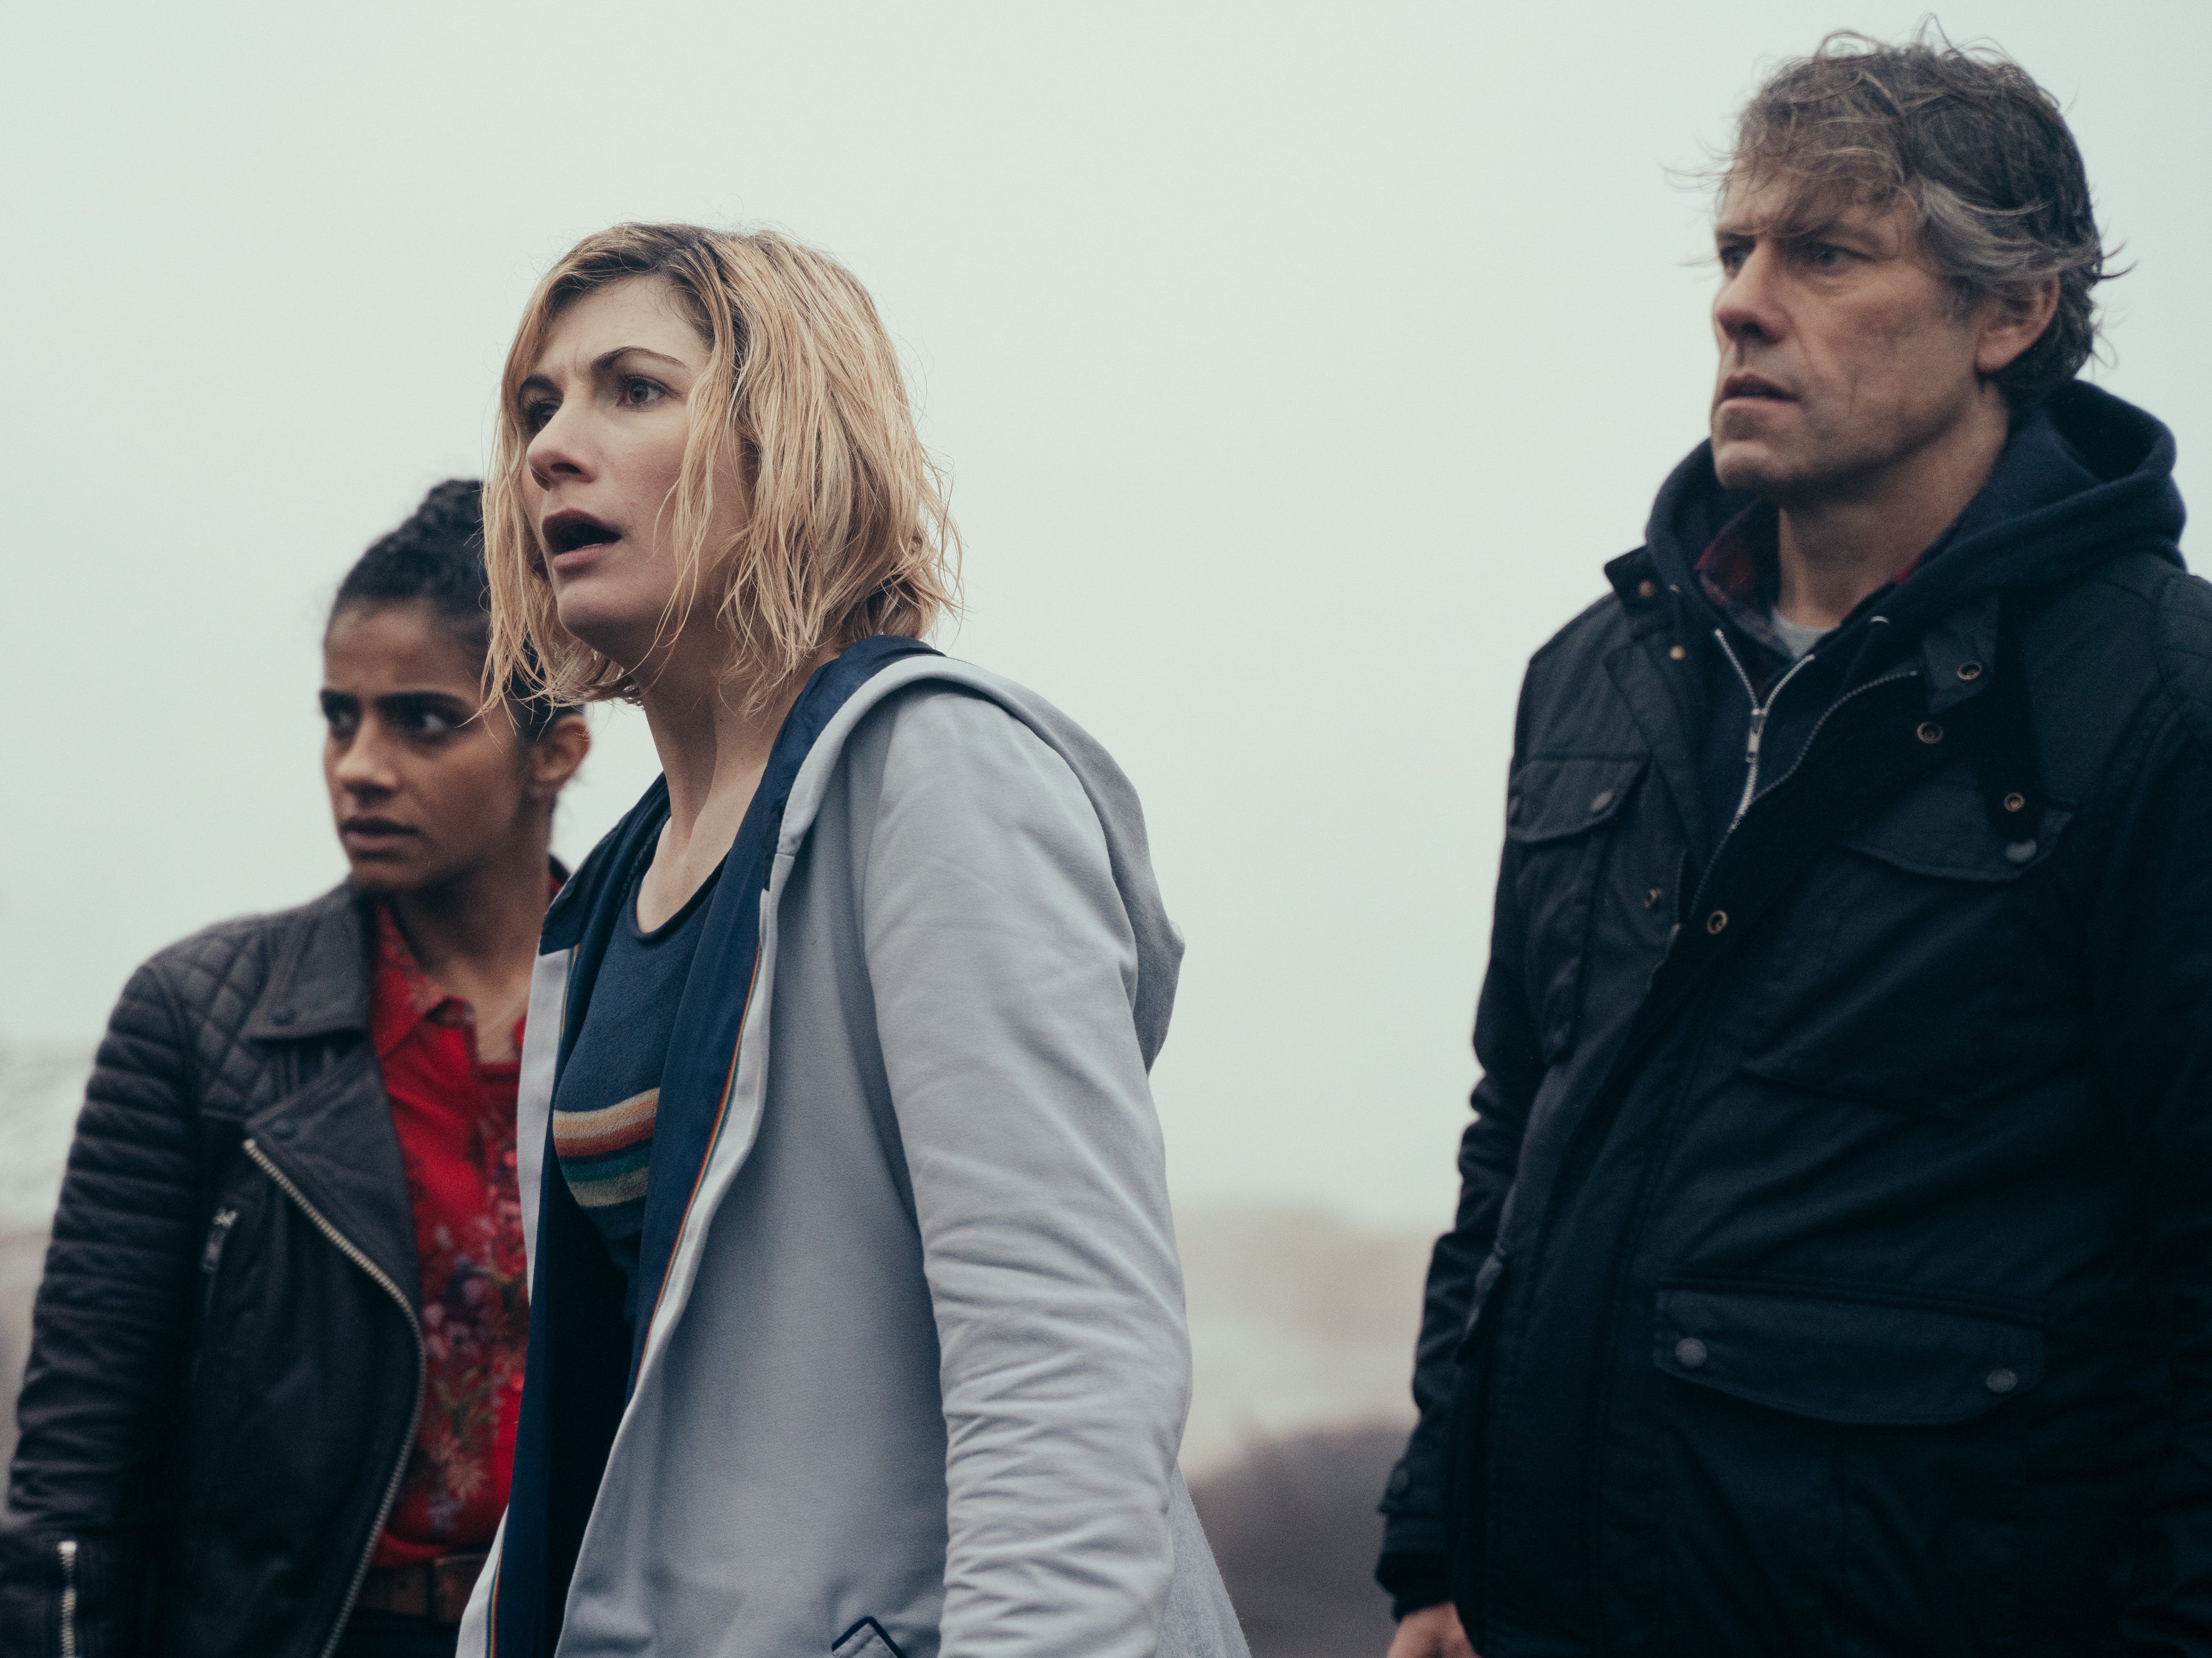 Yasmin Khan (Mandip Gill), The Doctor (Jodie Whittaker) and Dan (John Bishop) in the second episode of ‘Flux’